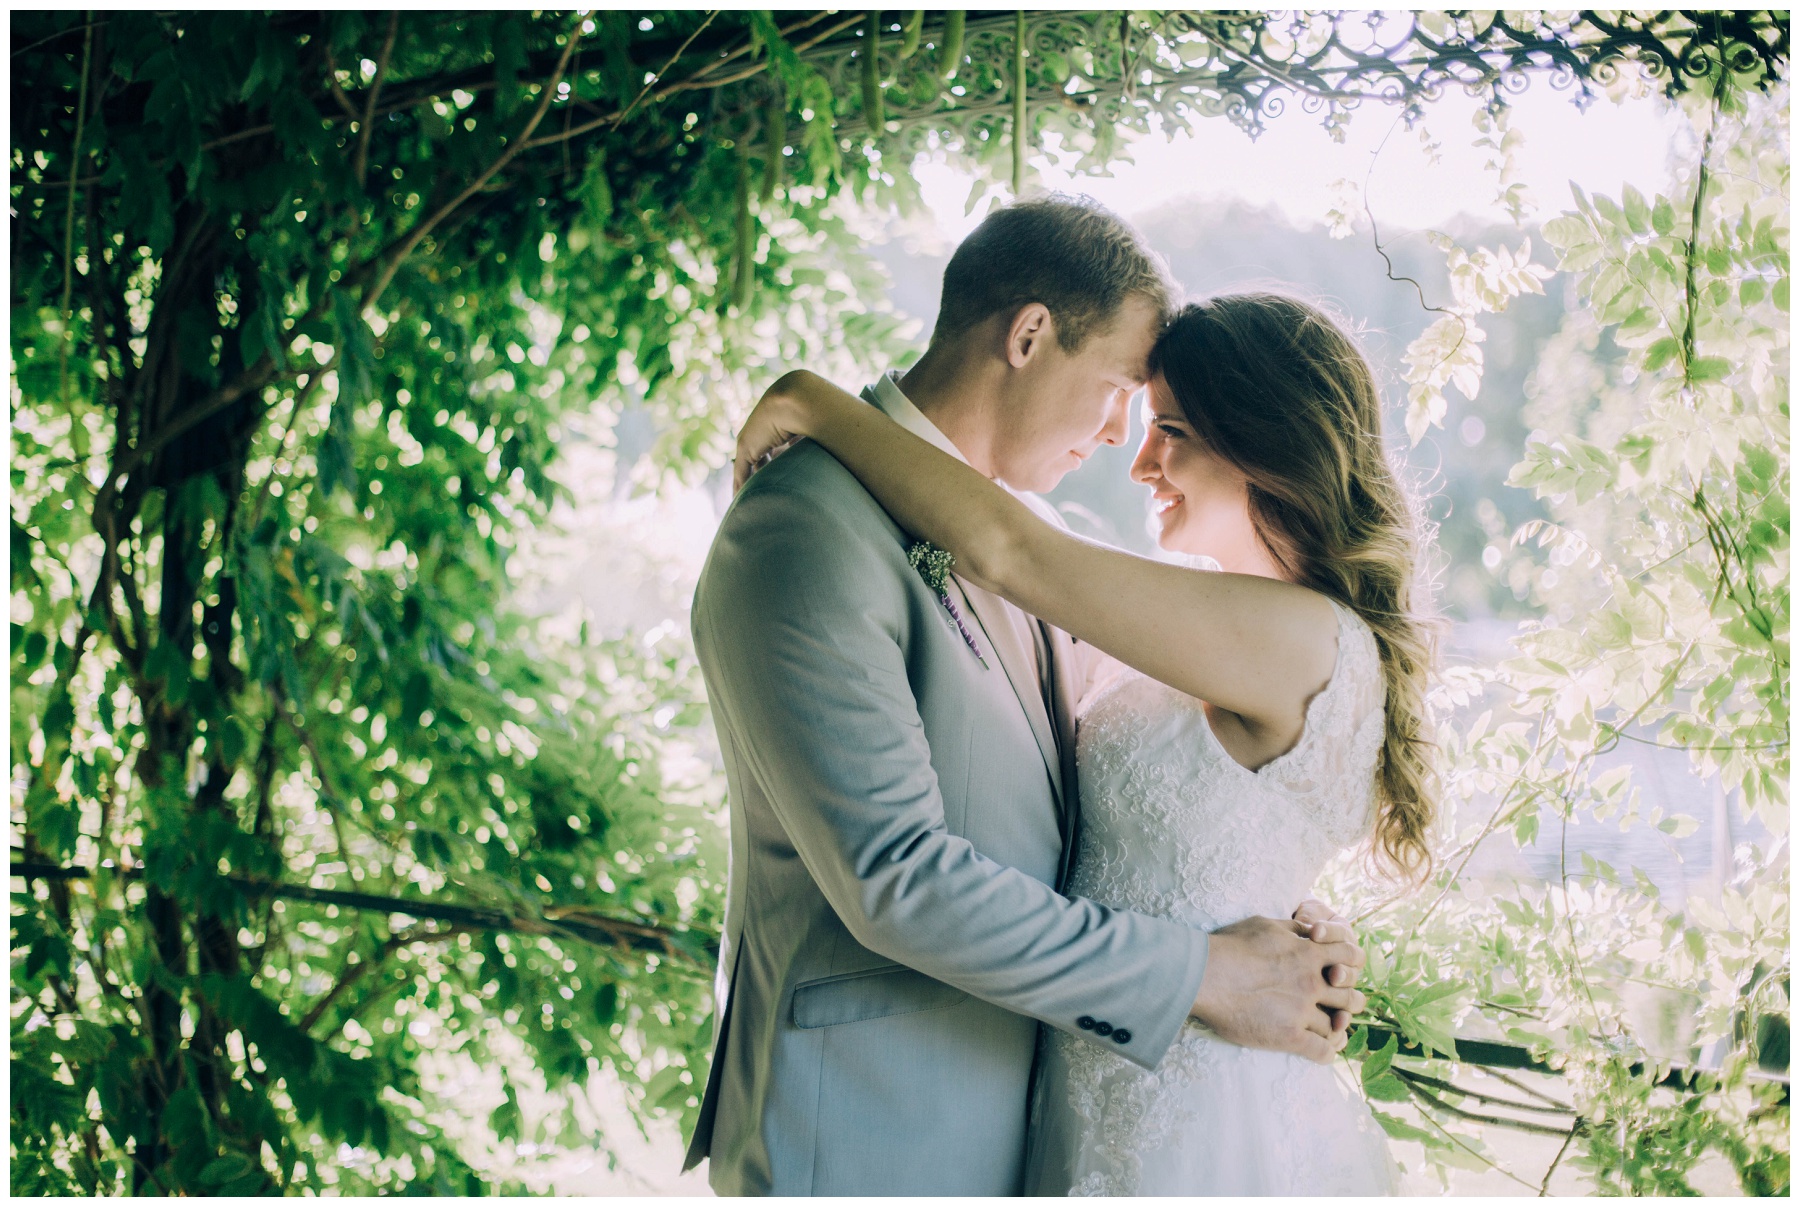 Ronel Kruger Cape Town Wedding and Lifestyle Photographer_8835.jpg